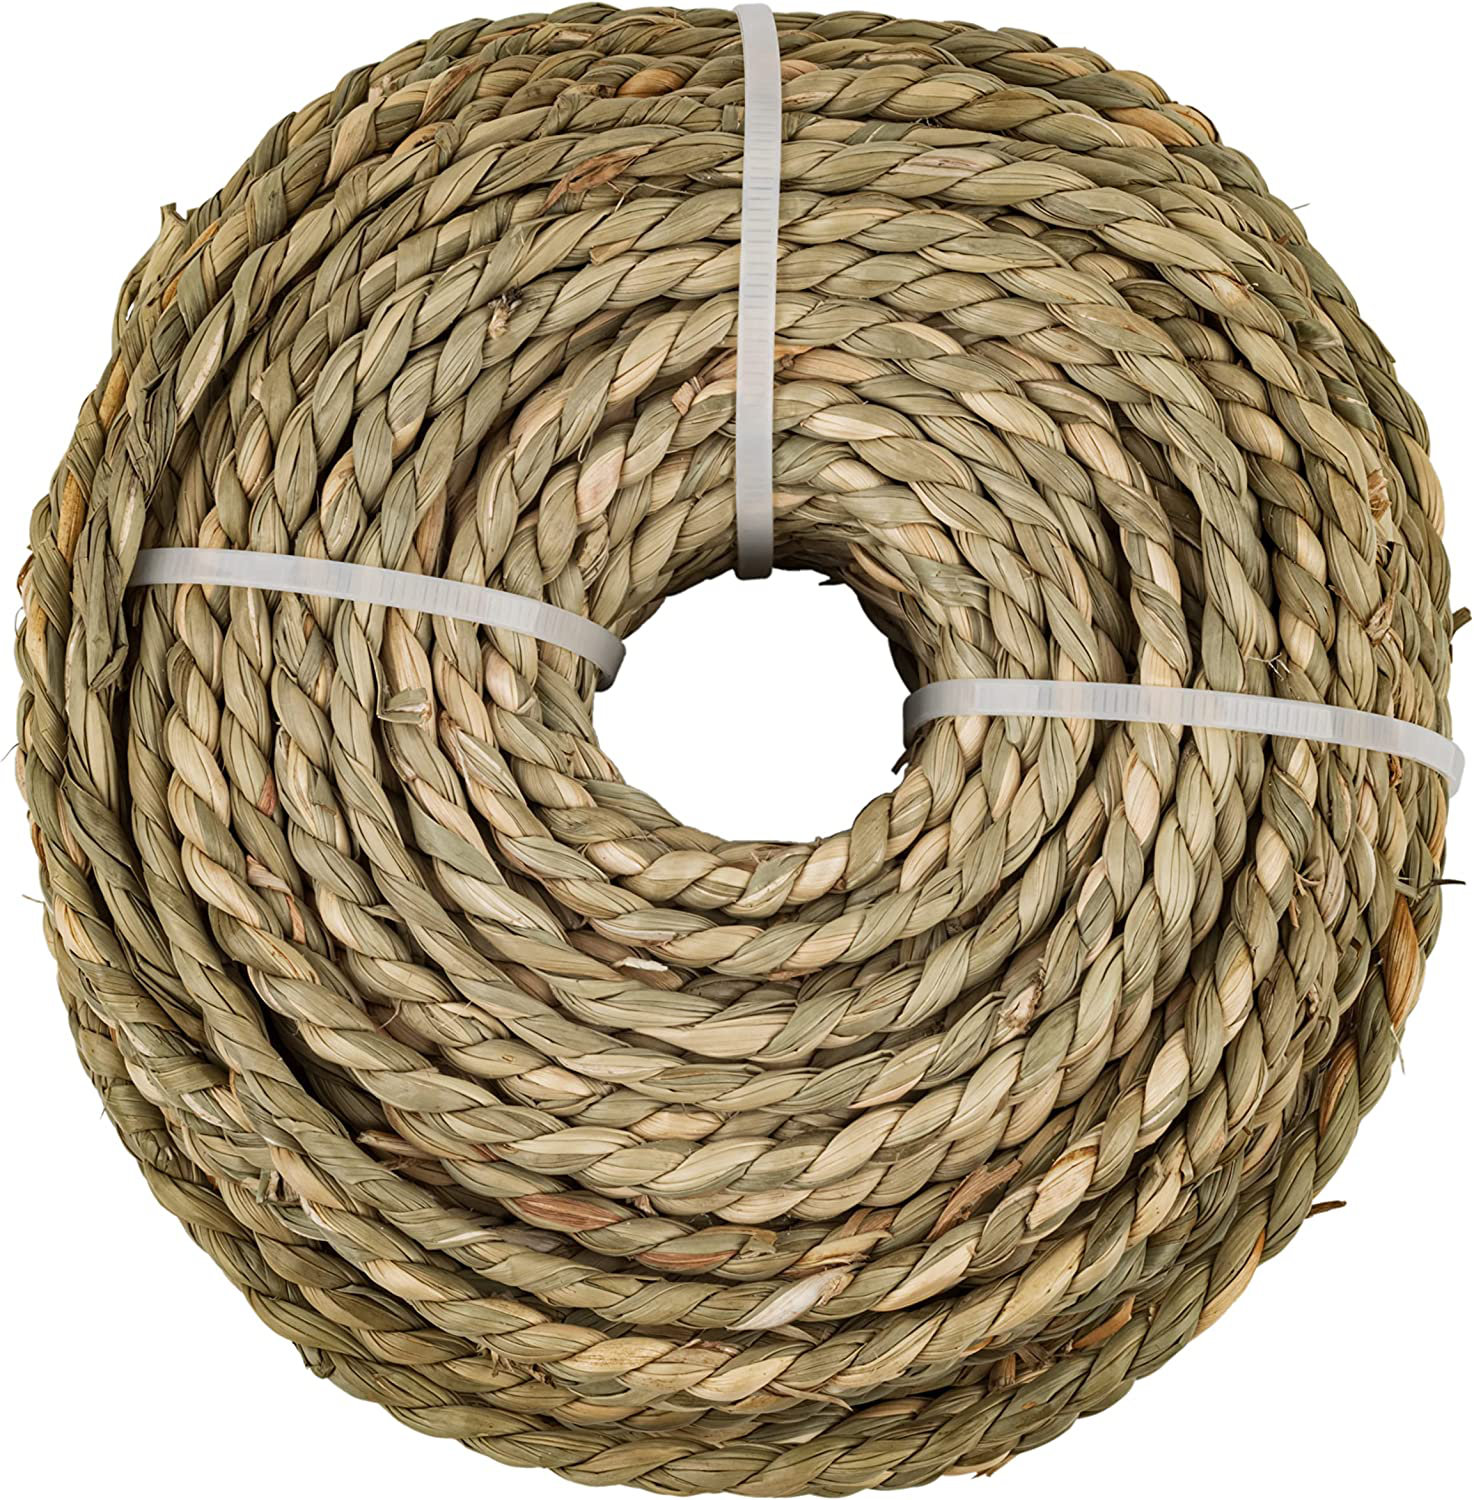 #4-1/4 Twisted Seagrass Rope, 1 Pound Coil, Rattan Reed for Basket Weaving  & Wicker Furniture Making